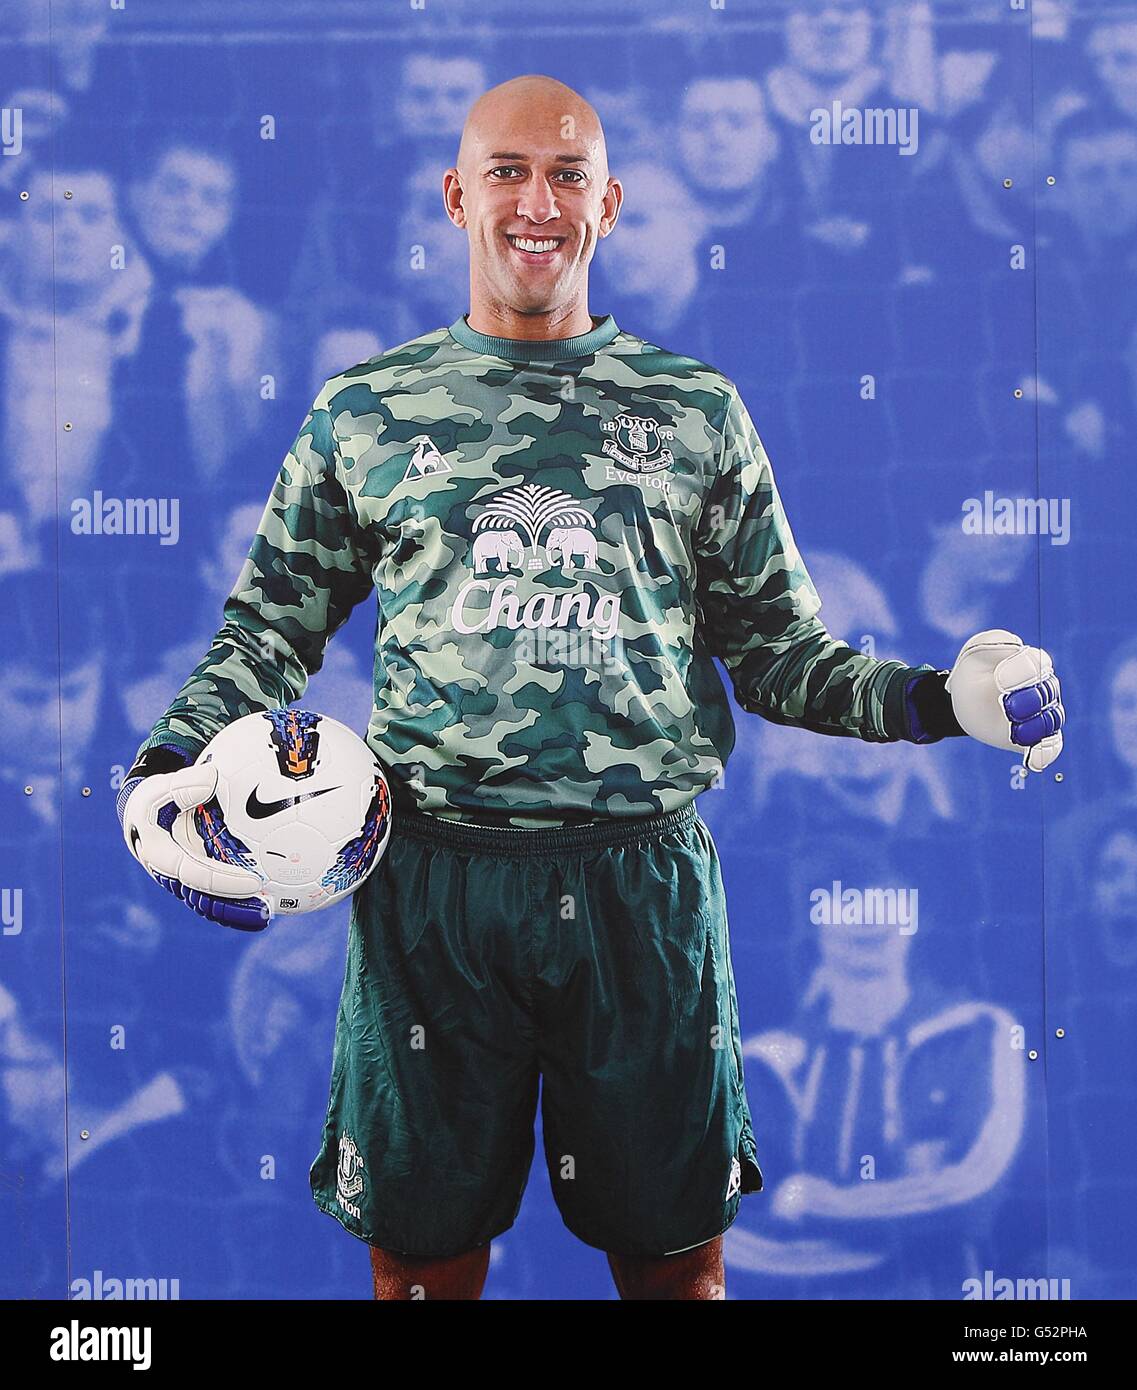 Soccer - Barclays Premier League - Everton v West Bromwich Albion - Goodison Park. Wall art of Everton's goalkeeper Tim Howard at Goodison Park Stock Photo